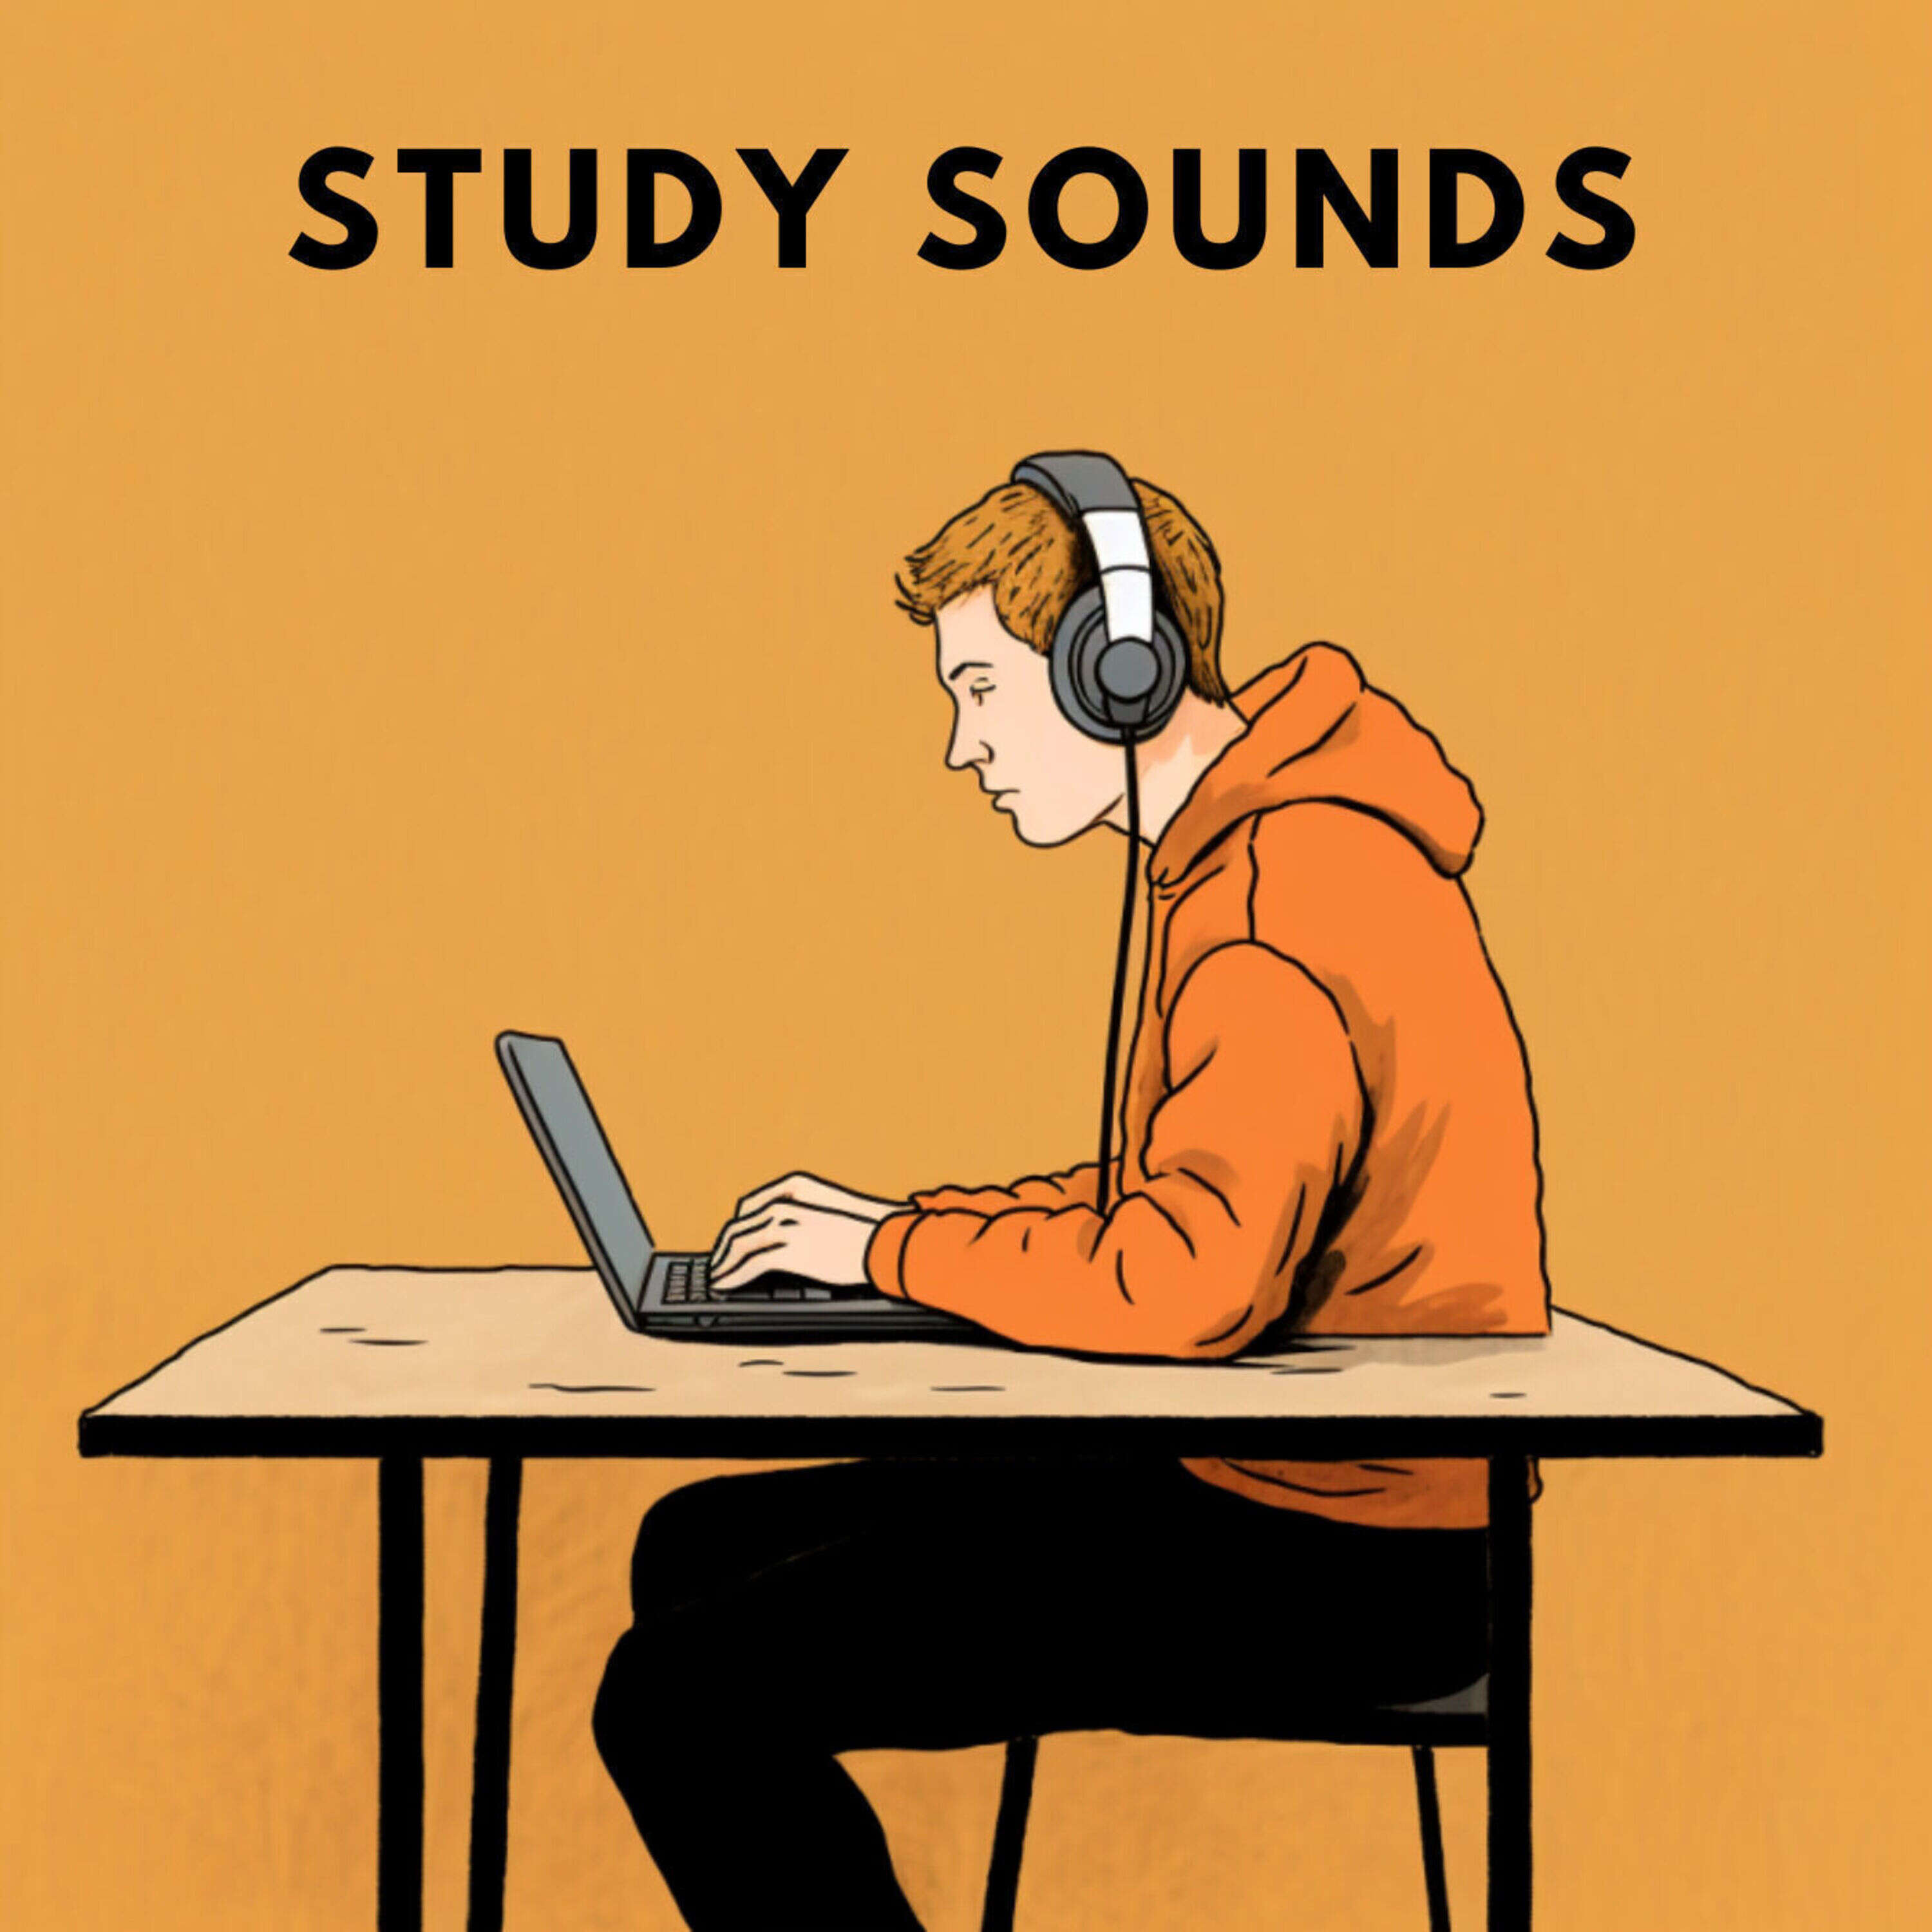 Study sounds - 1 Hour Of Deep Concentration sounds for Studying and Memorizing by healingMate